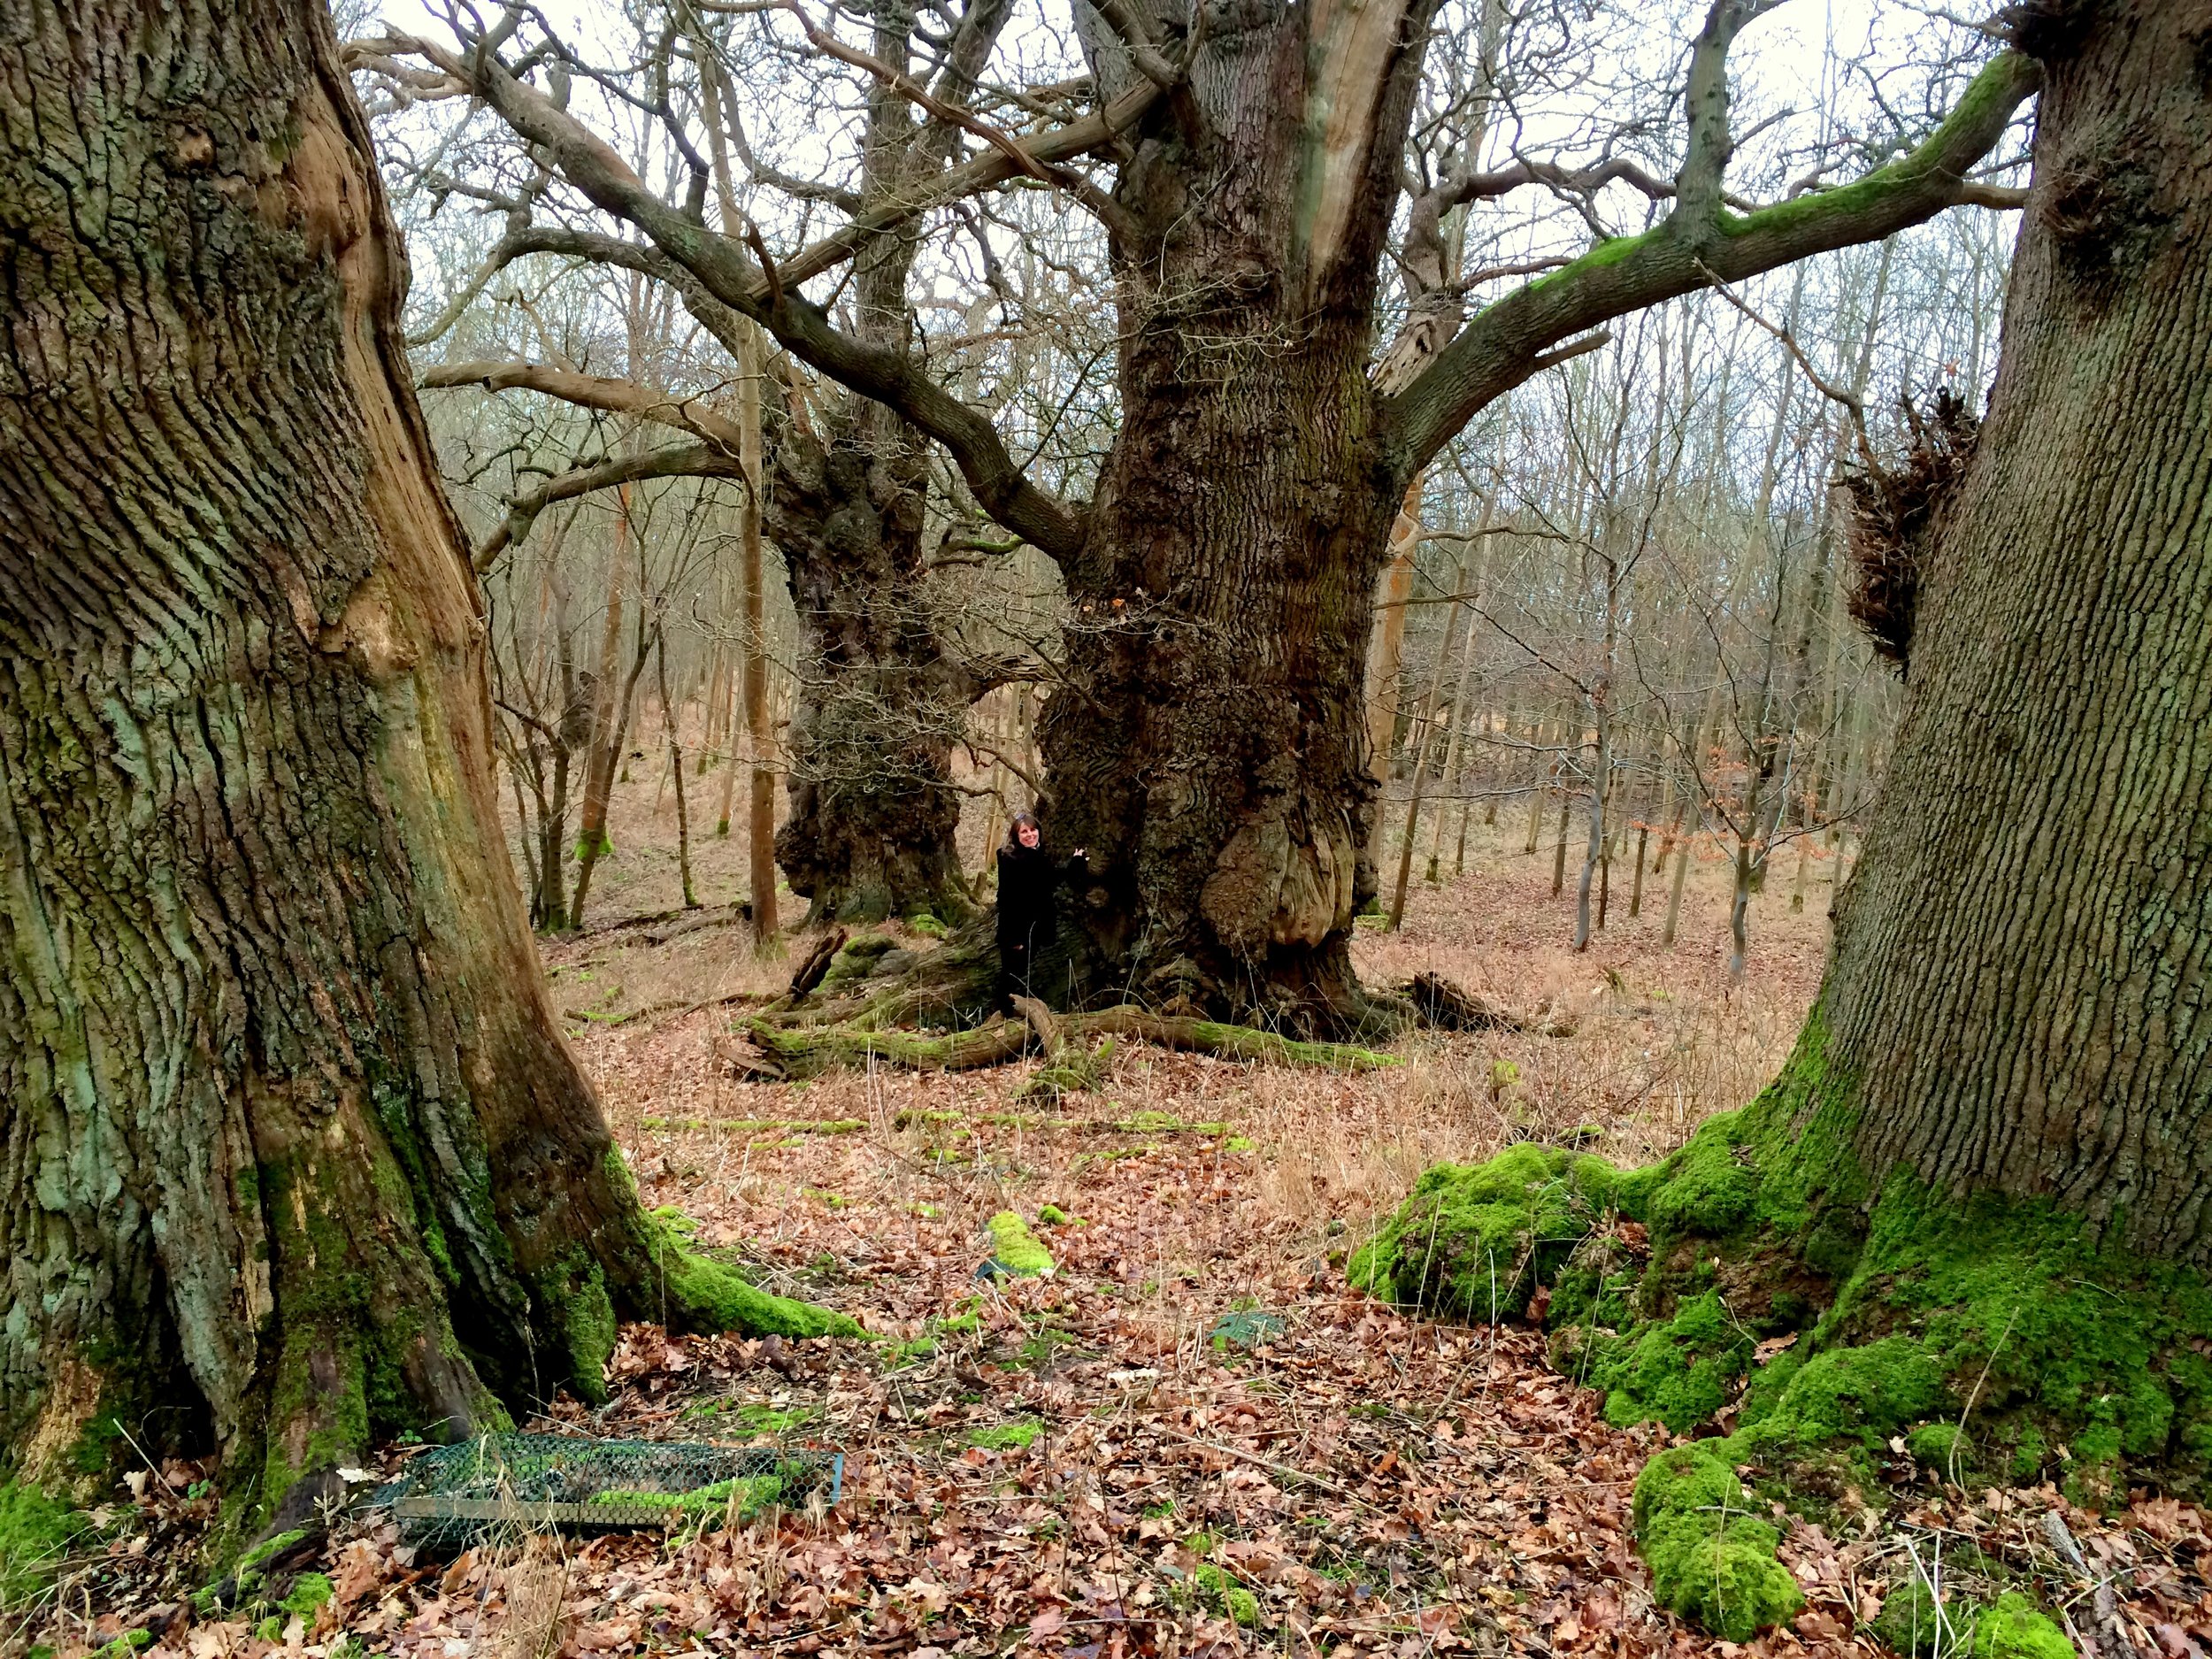 A privilege to visit these grand Oaks